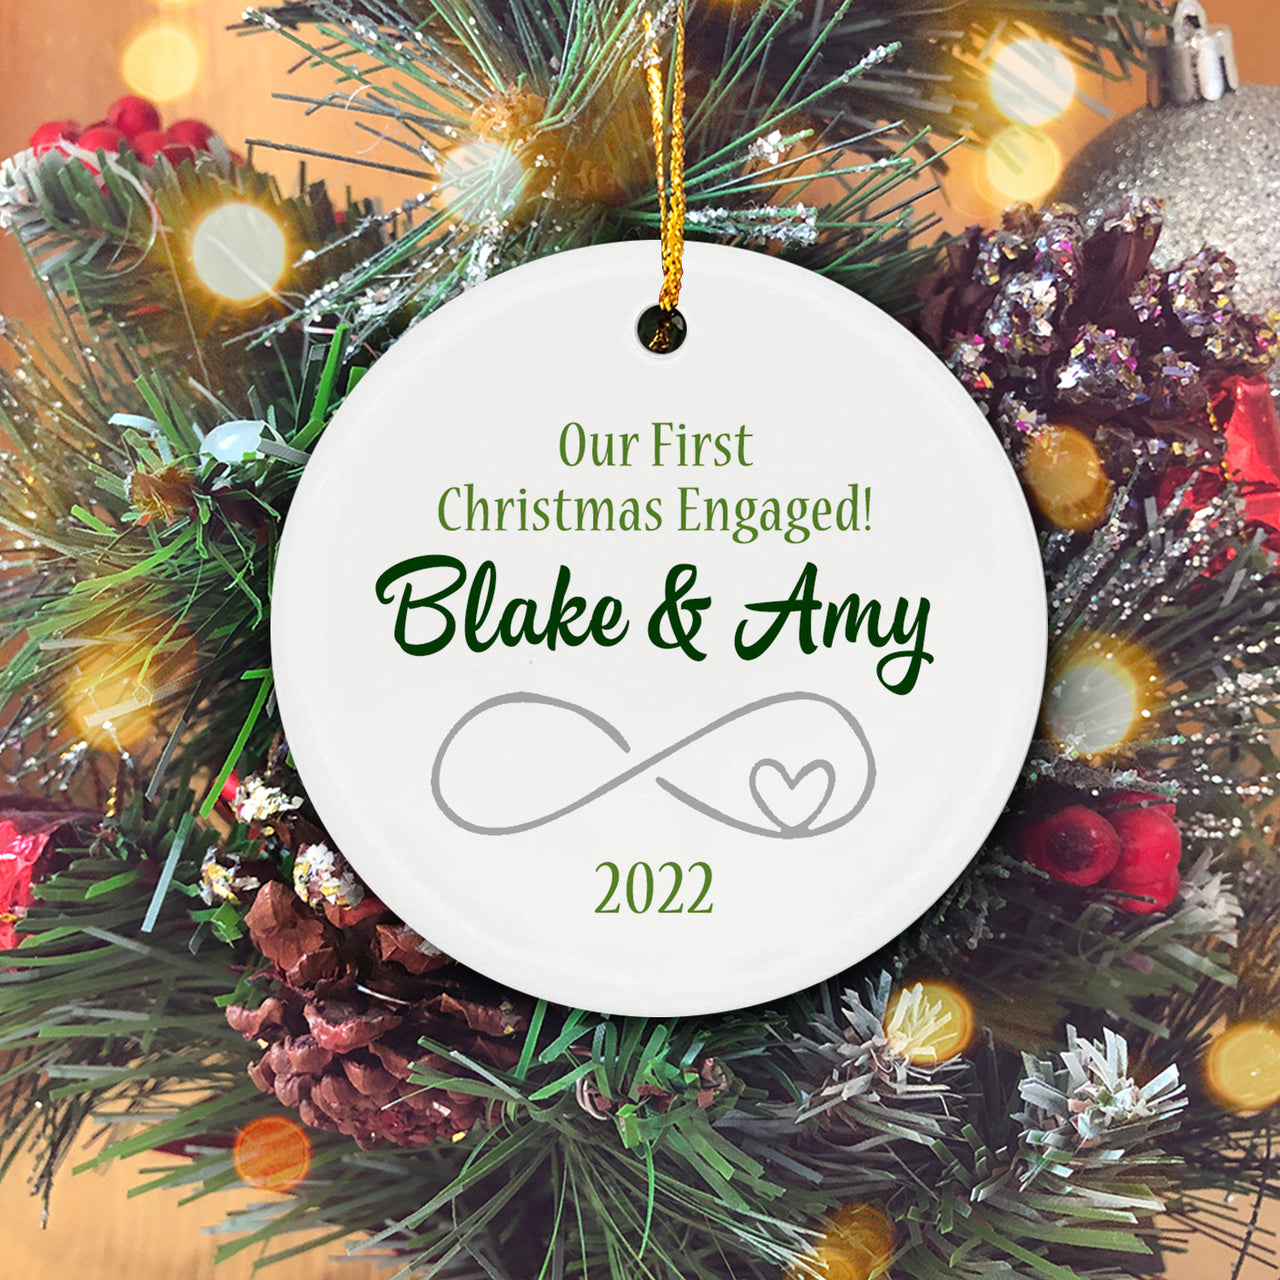 Our First Christmas Engaged Personalized Christmas Premium Ceramic Ornaments Sets for Christmas Tree